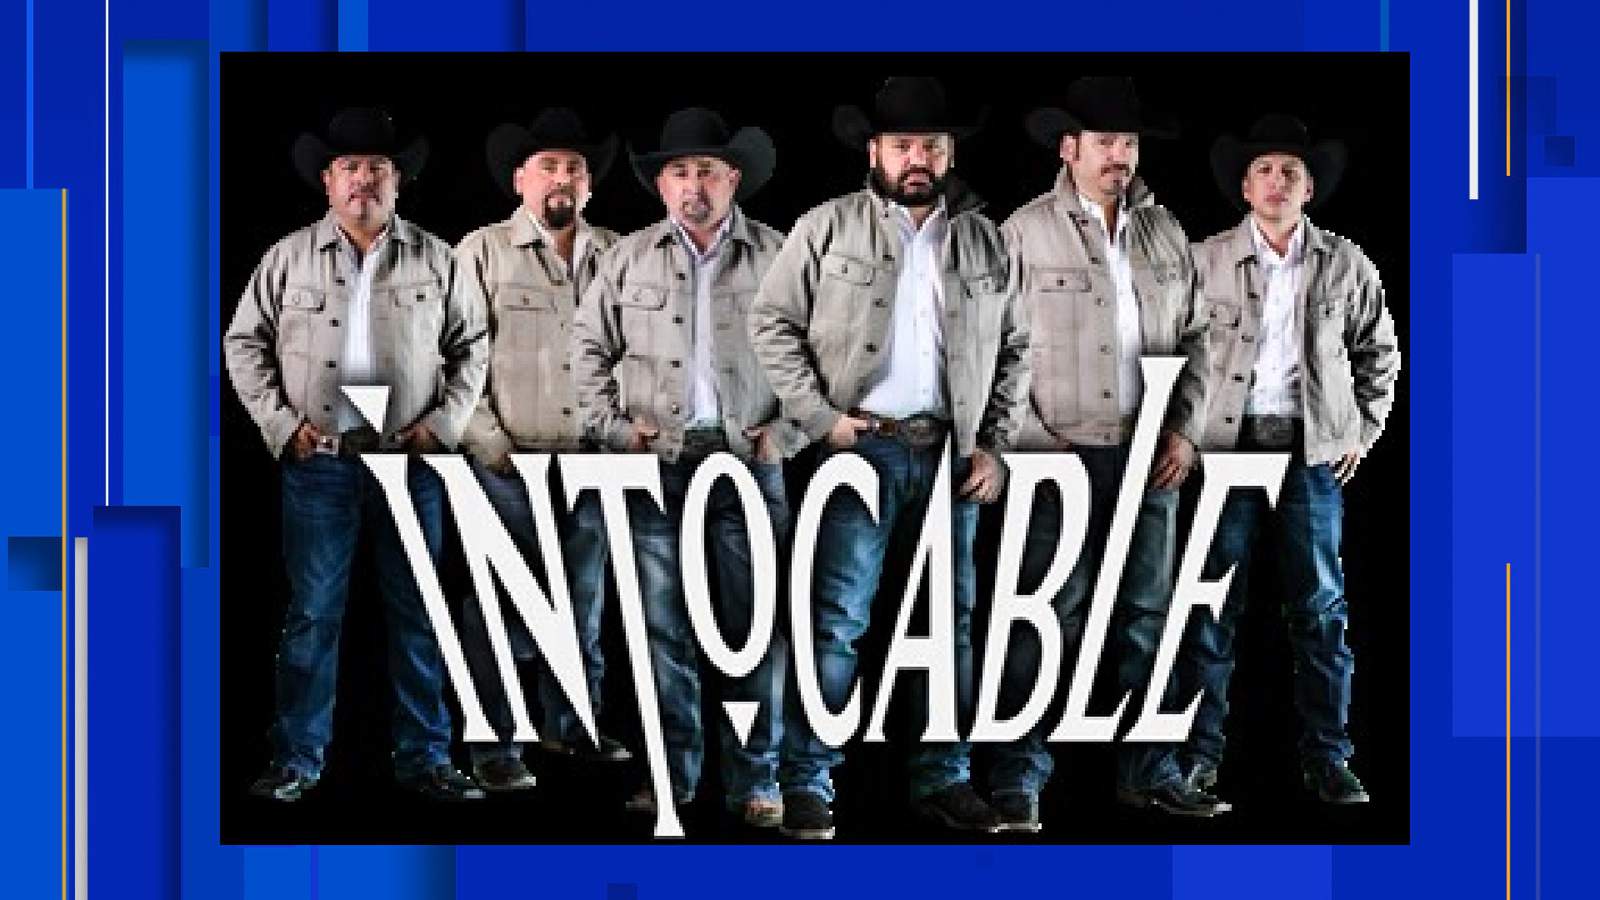 Popular Tejano/Norteo band Intocable to perform live drive-in concert in San Antonio this weekend